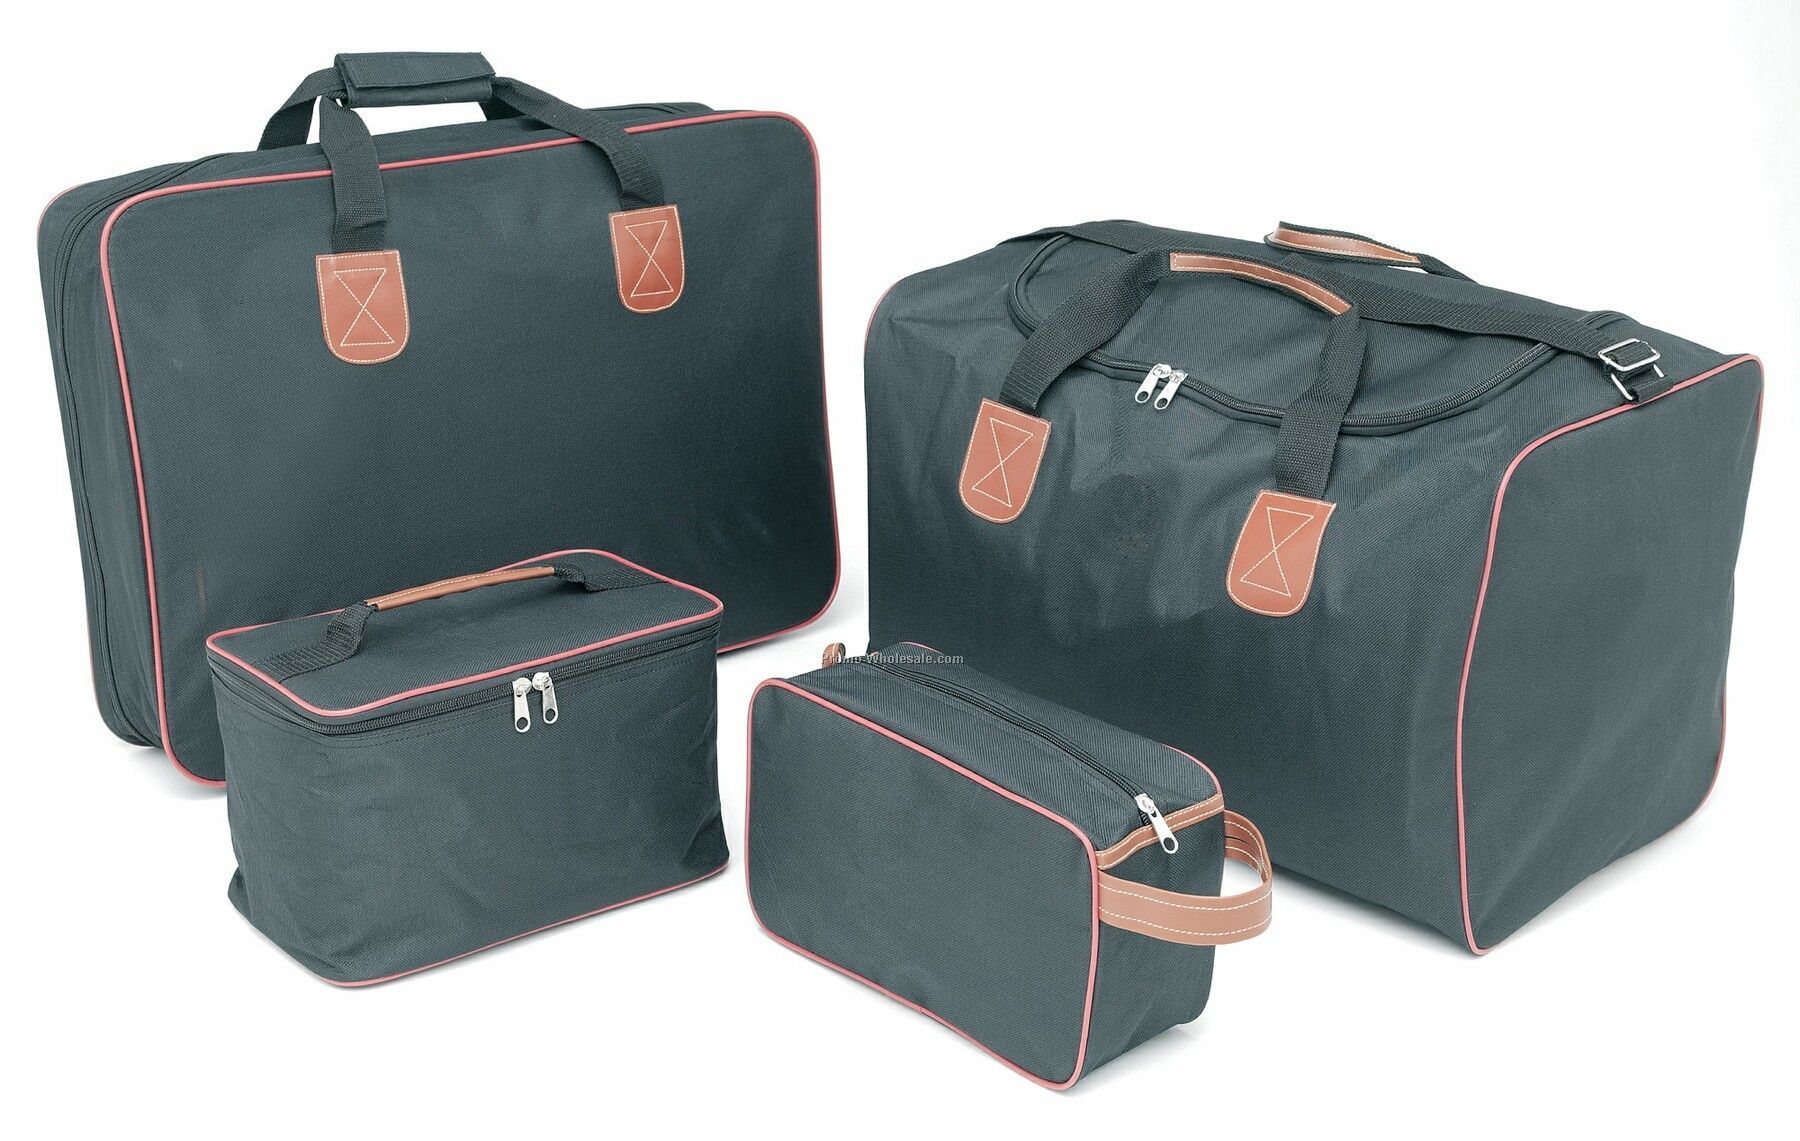 4 Piece Luggage Set (Embroidered)